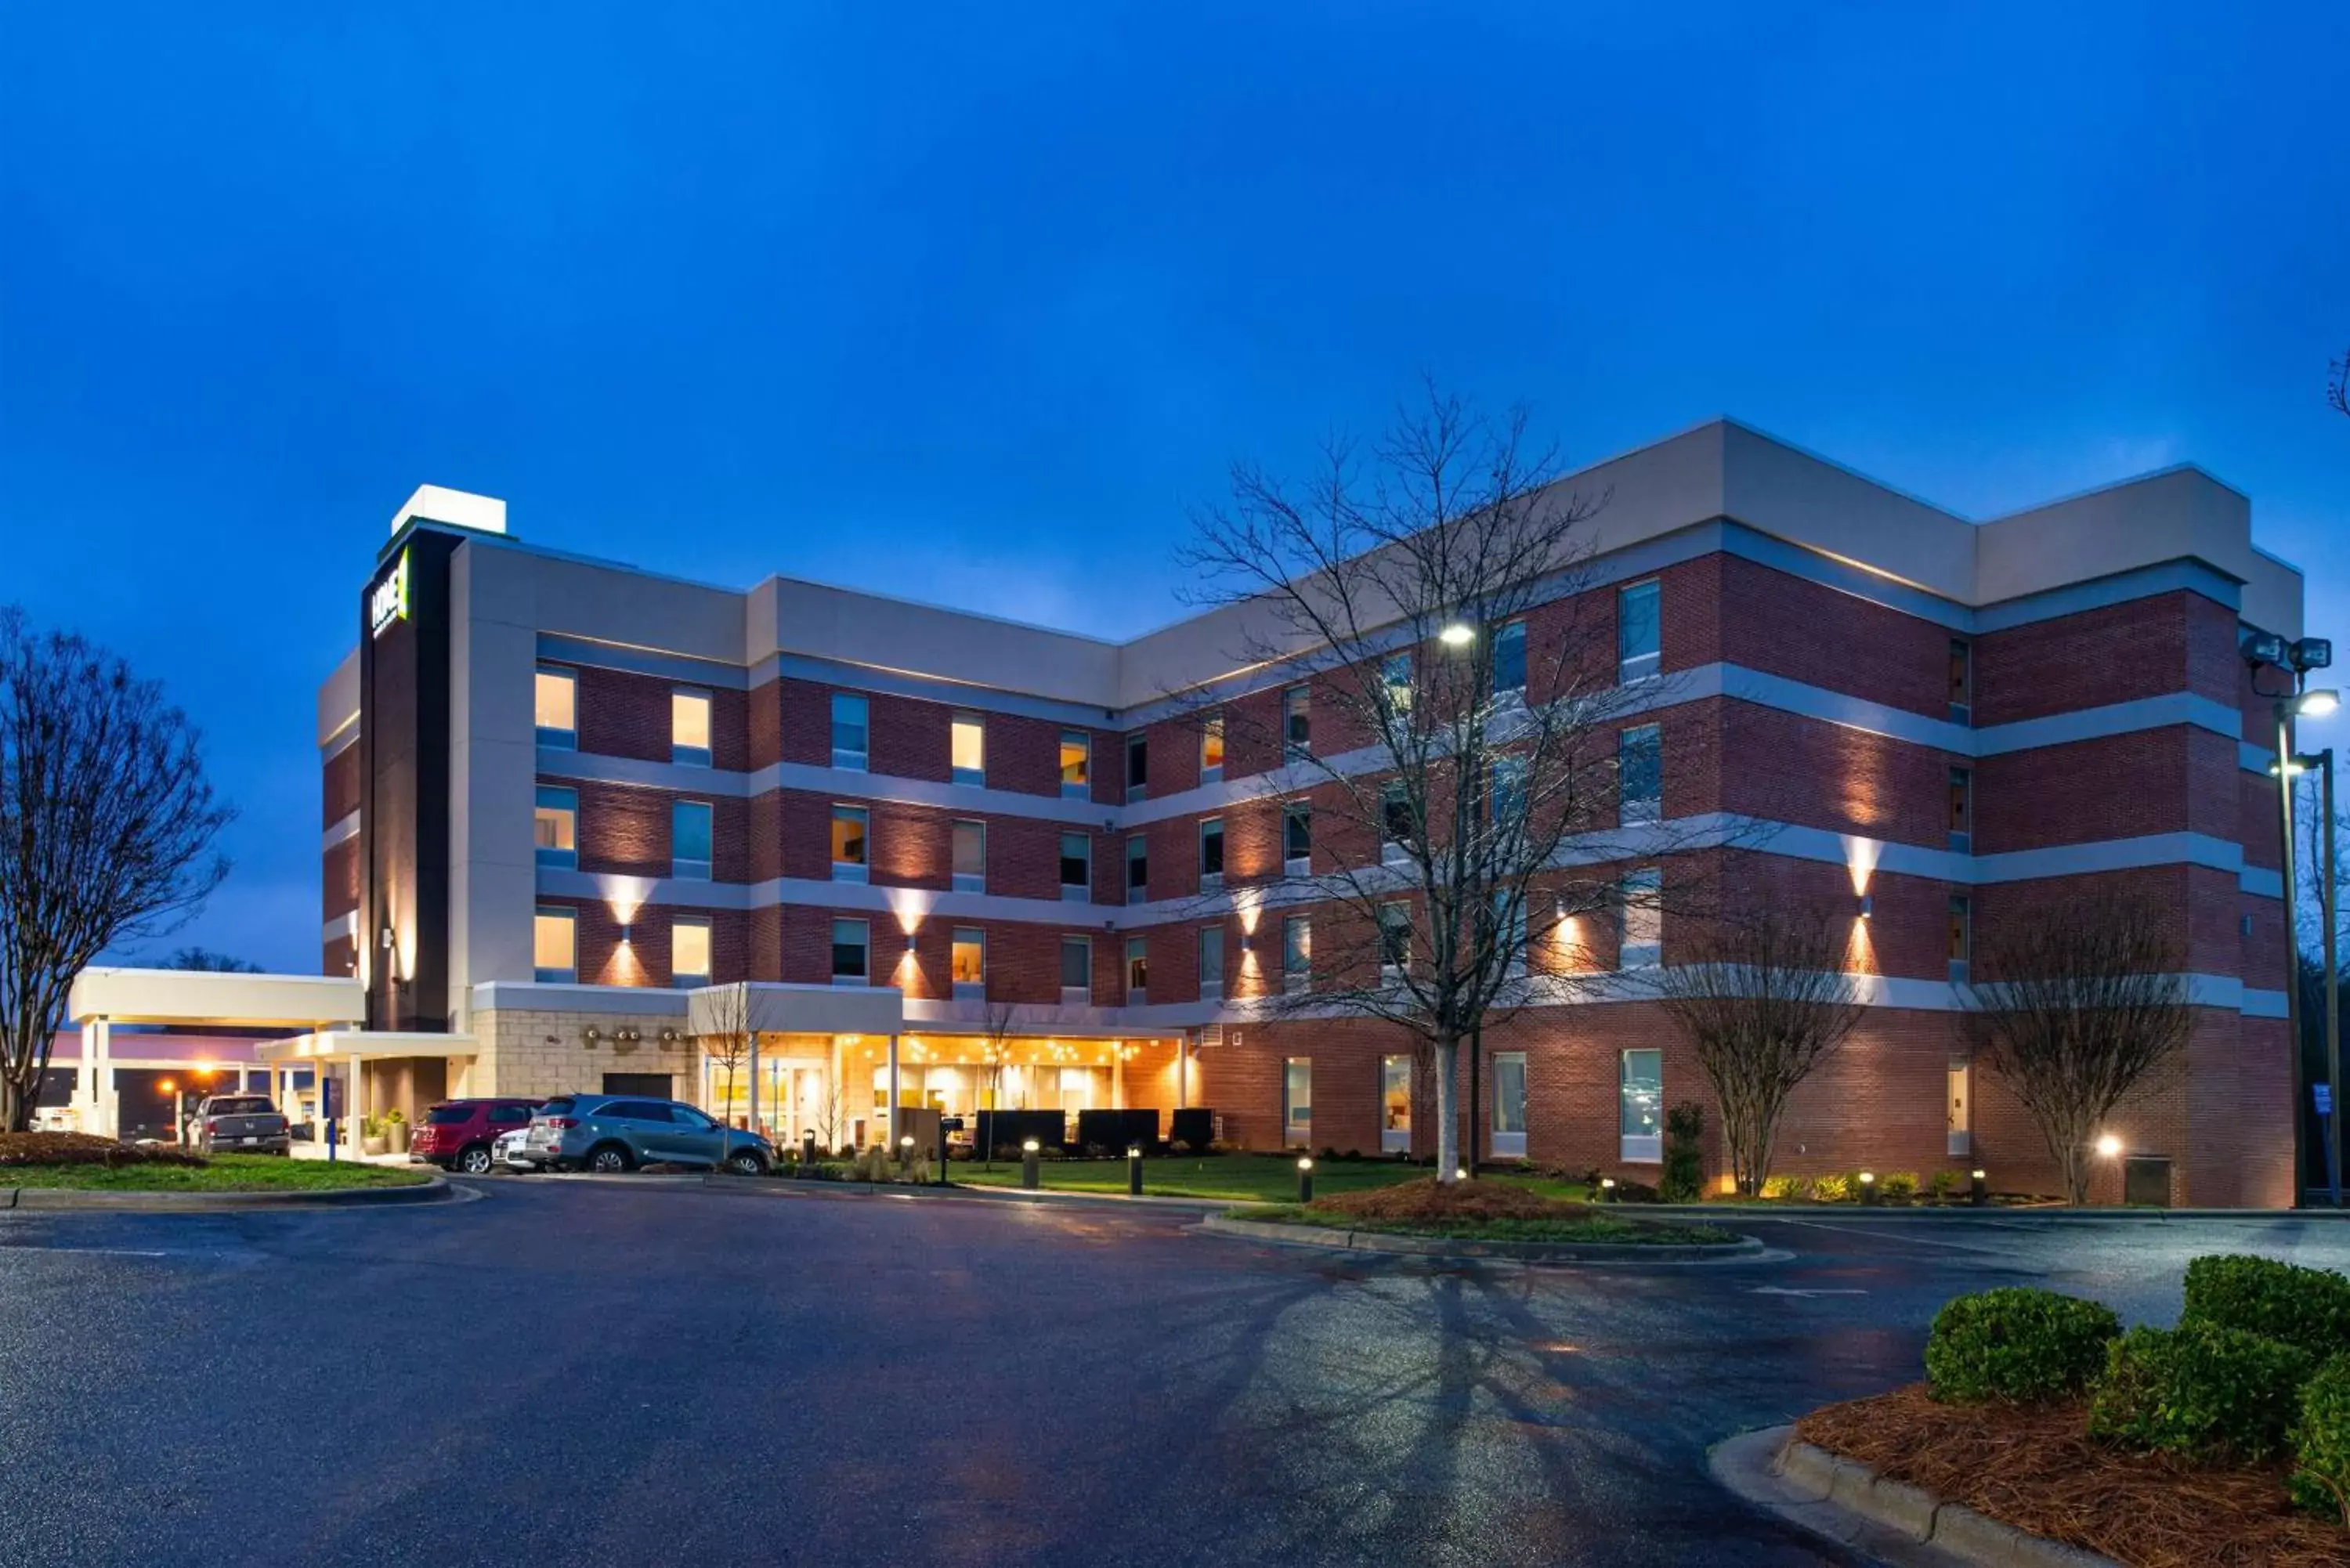 Property Building in Home2 Suites By Hilton Charlotte Mooresville, Nc